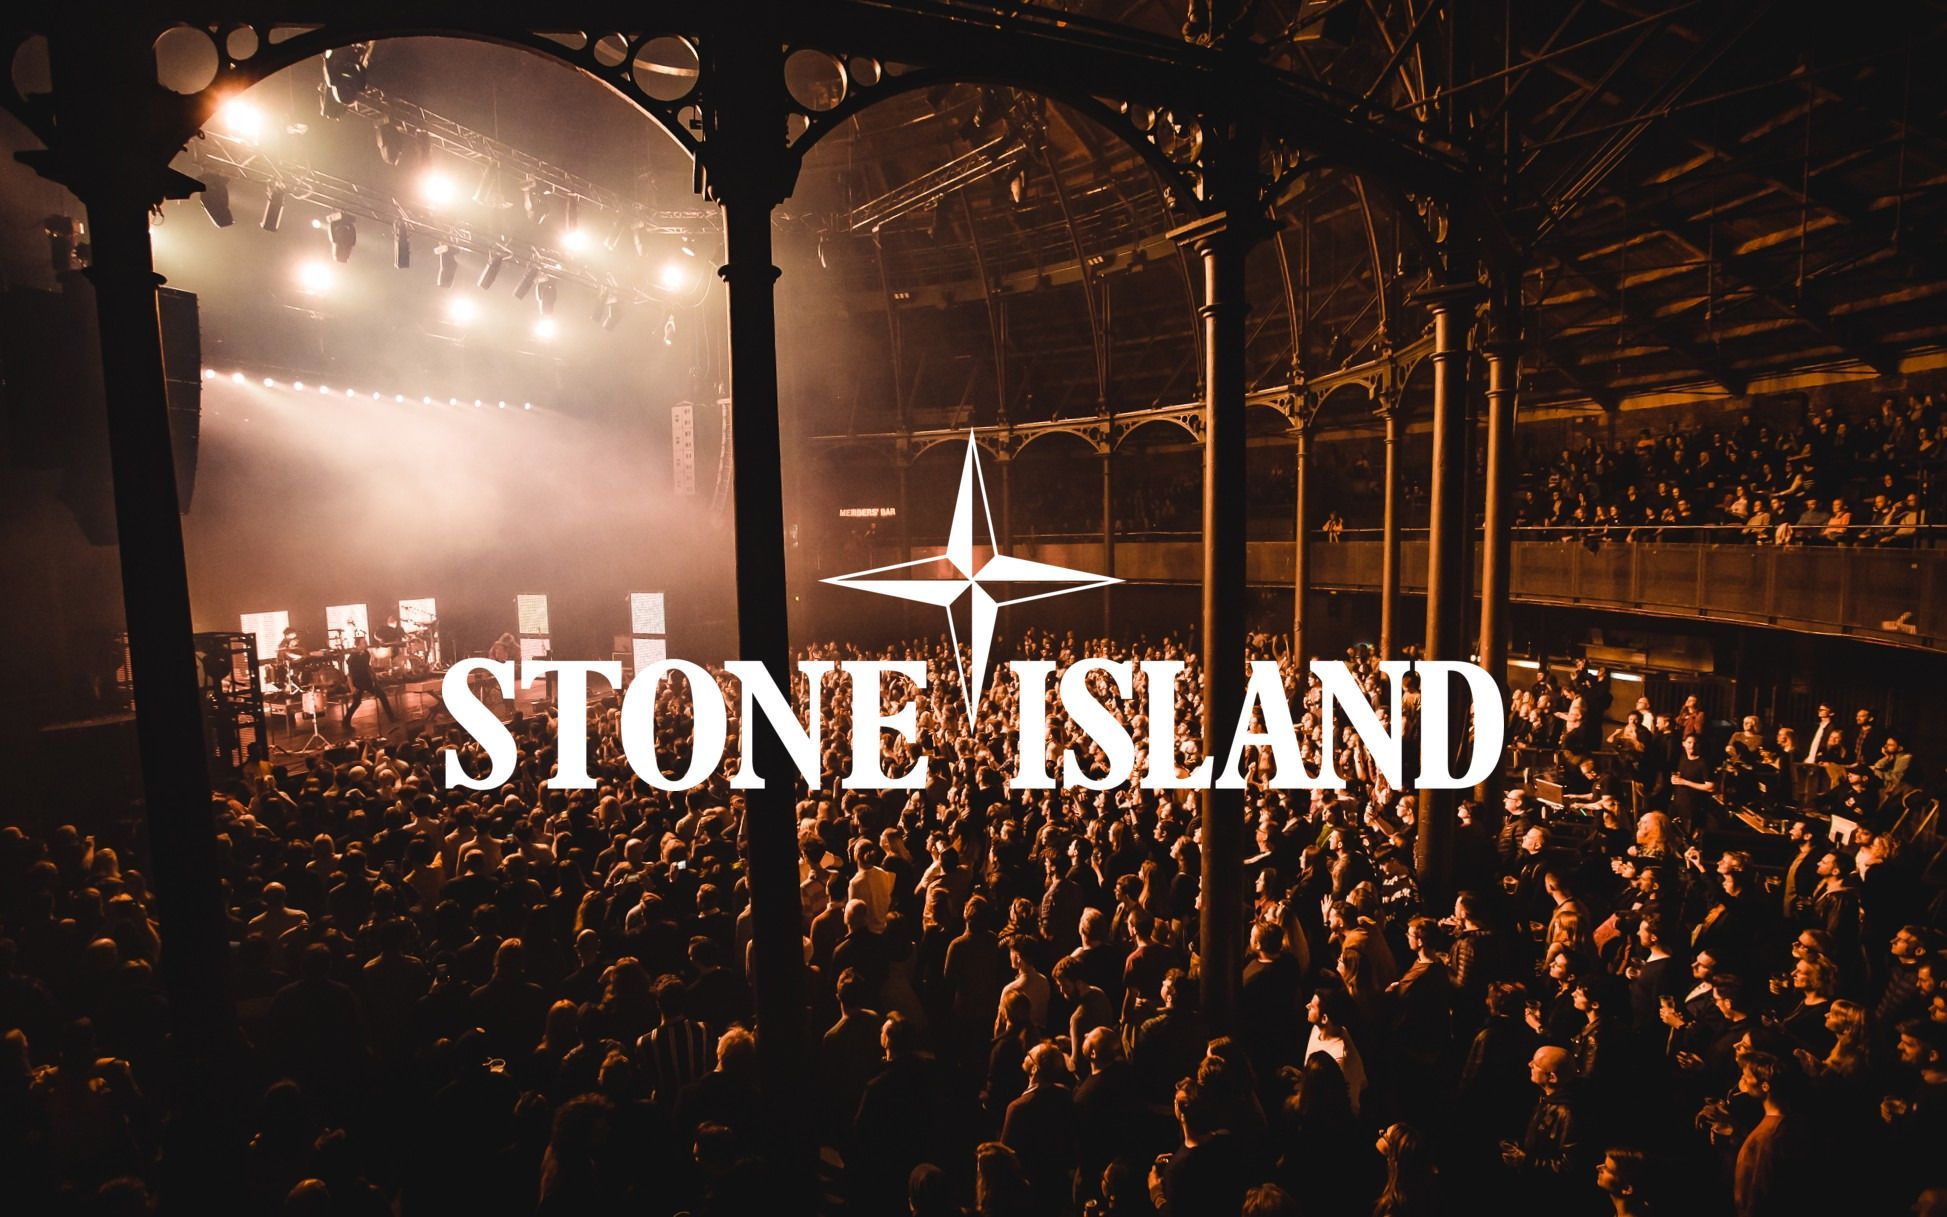 The new Stone Island and C2C event in London An unmissable evening at the legendary The Roundhouse